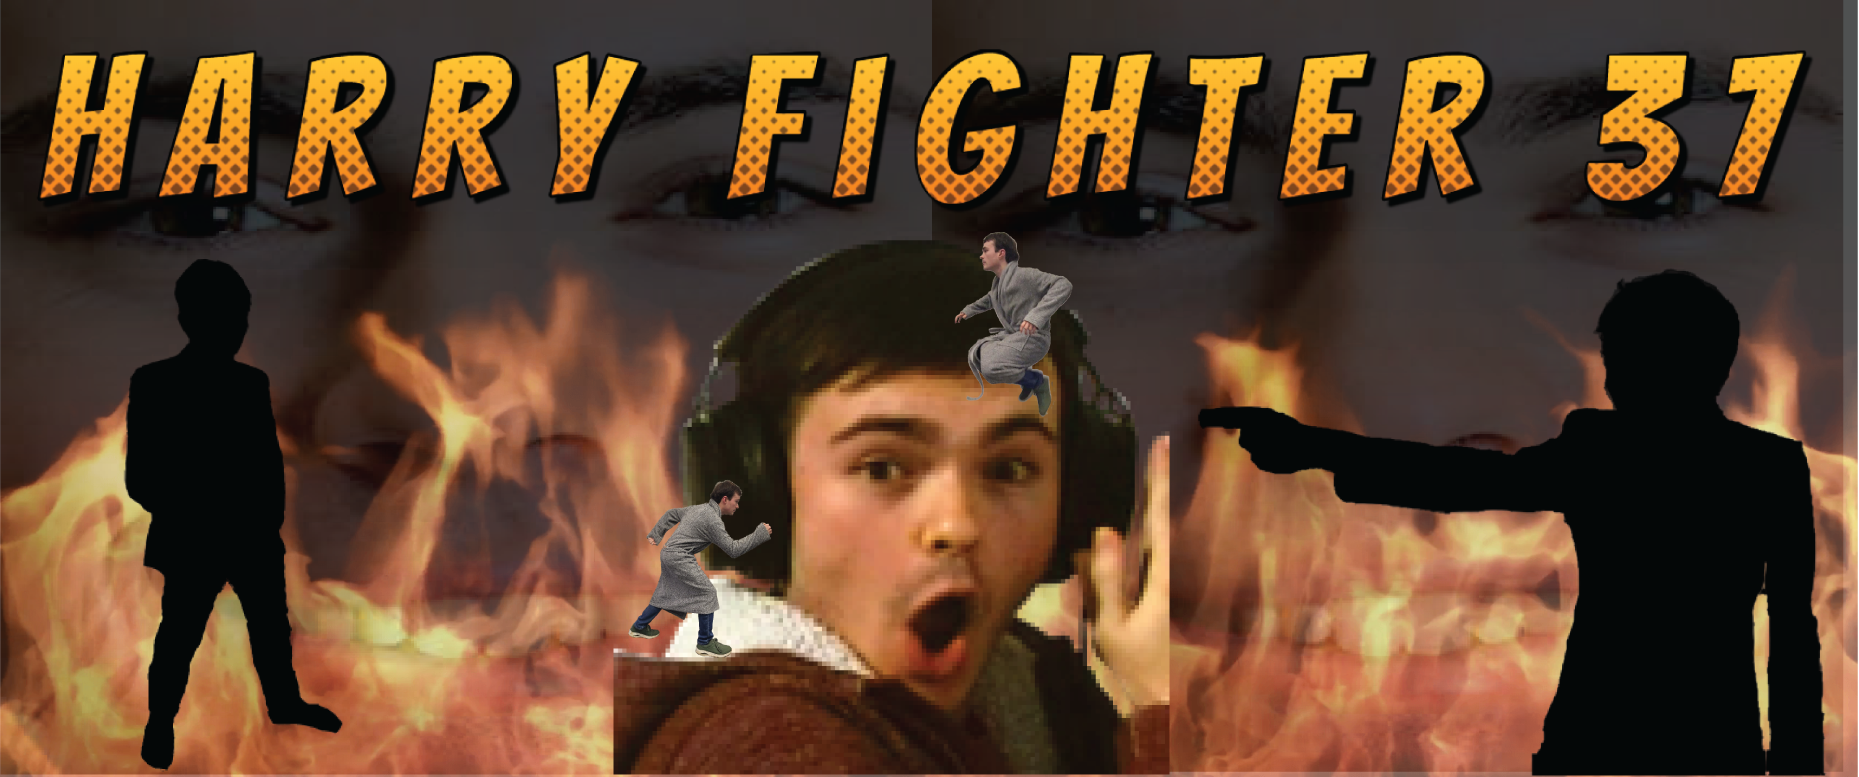 Harry Fighter 12